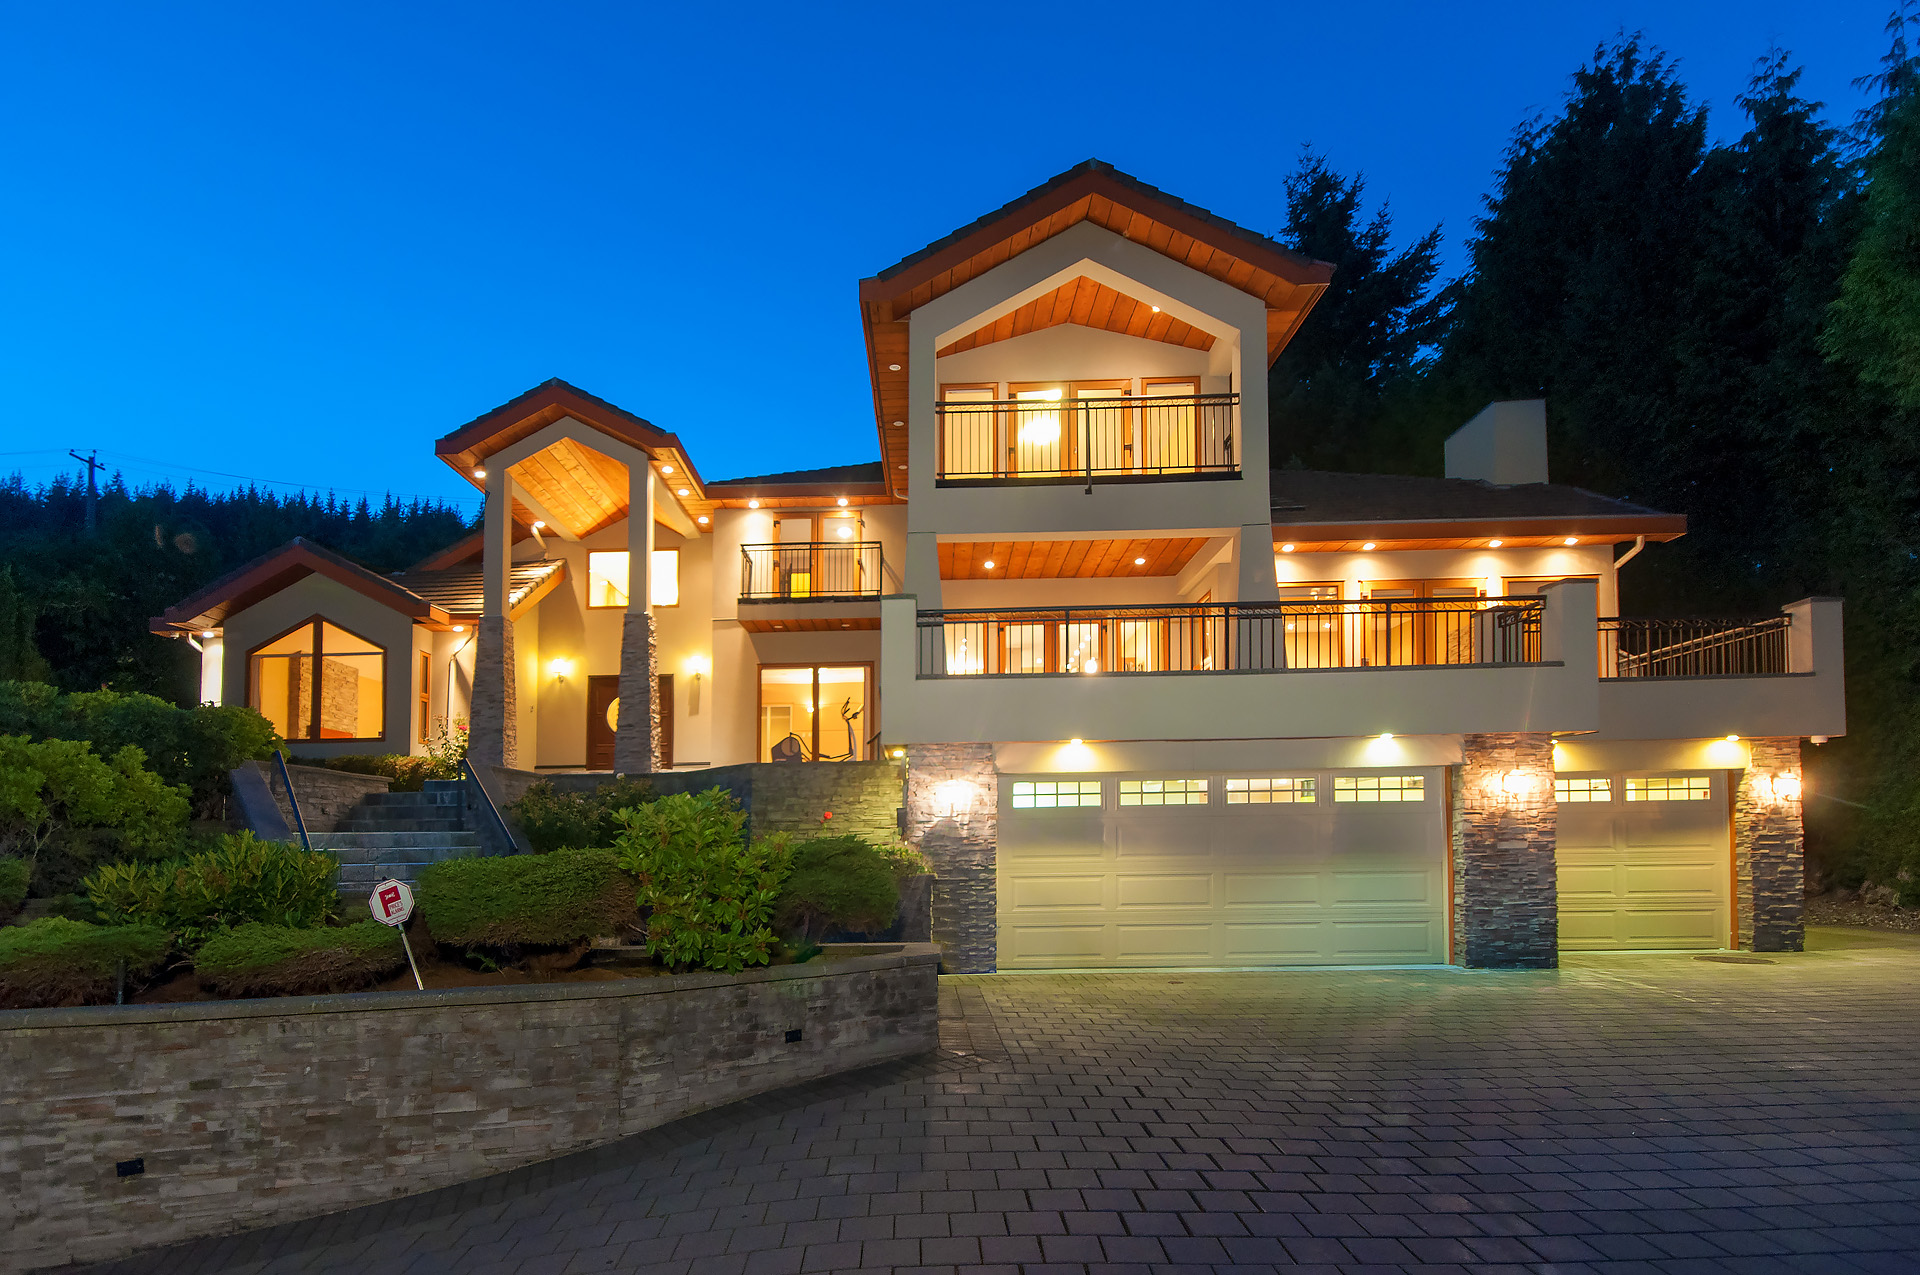 West Vancouver Real Estate